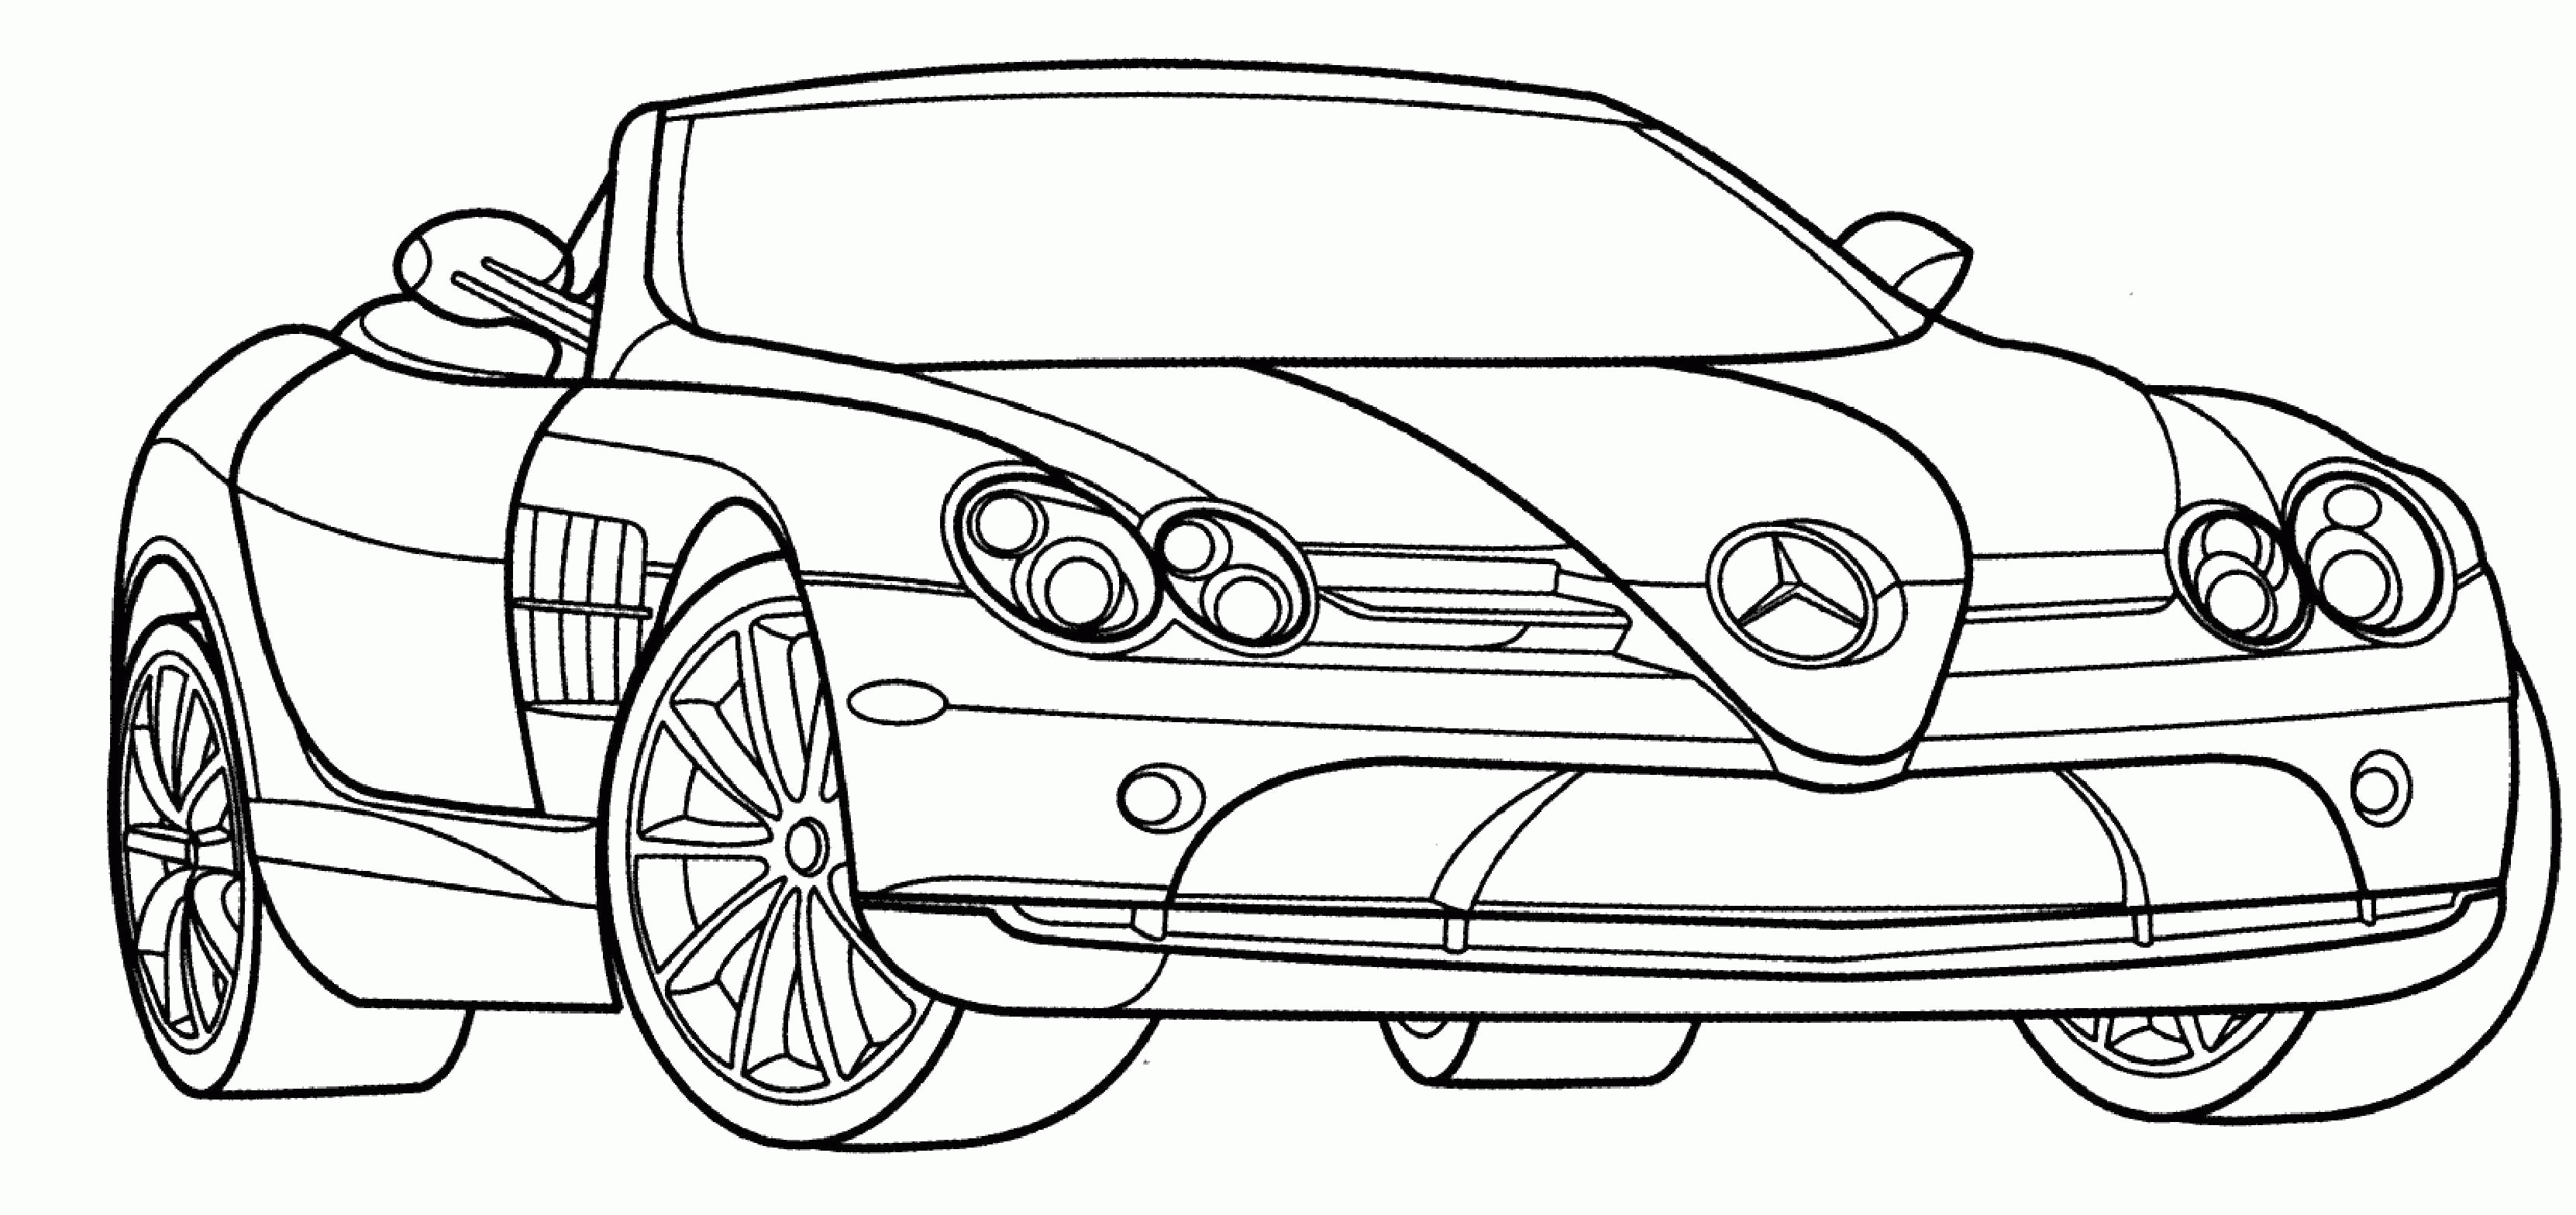 Cars Coloring Pages Pdf   Coloring Home